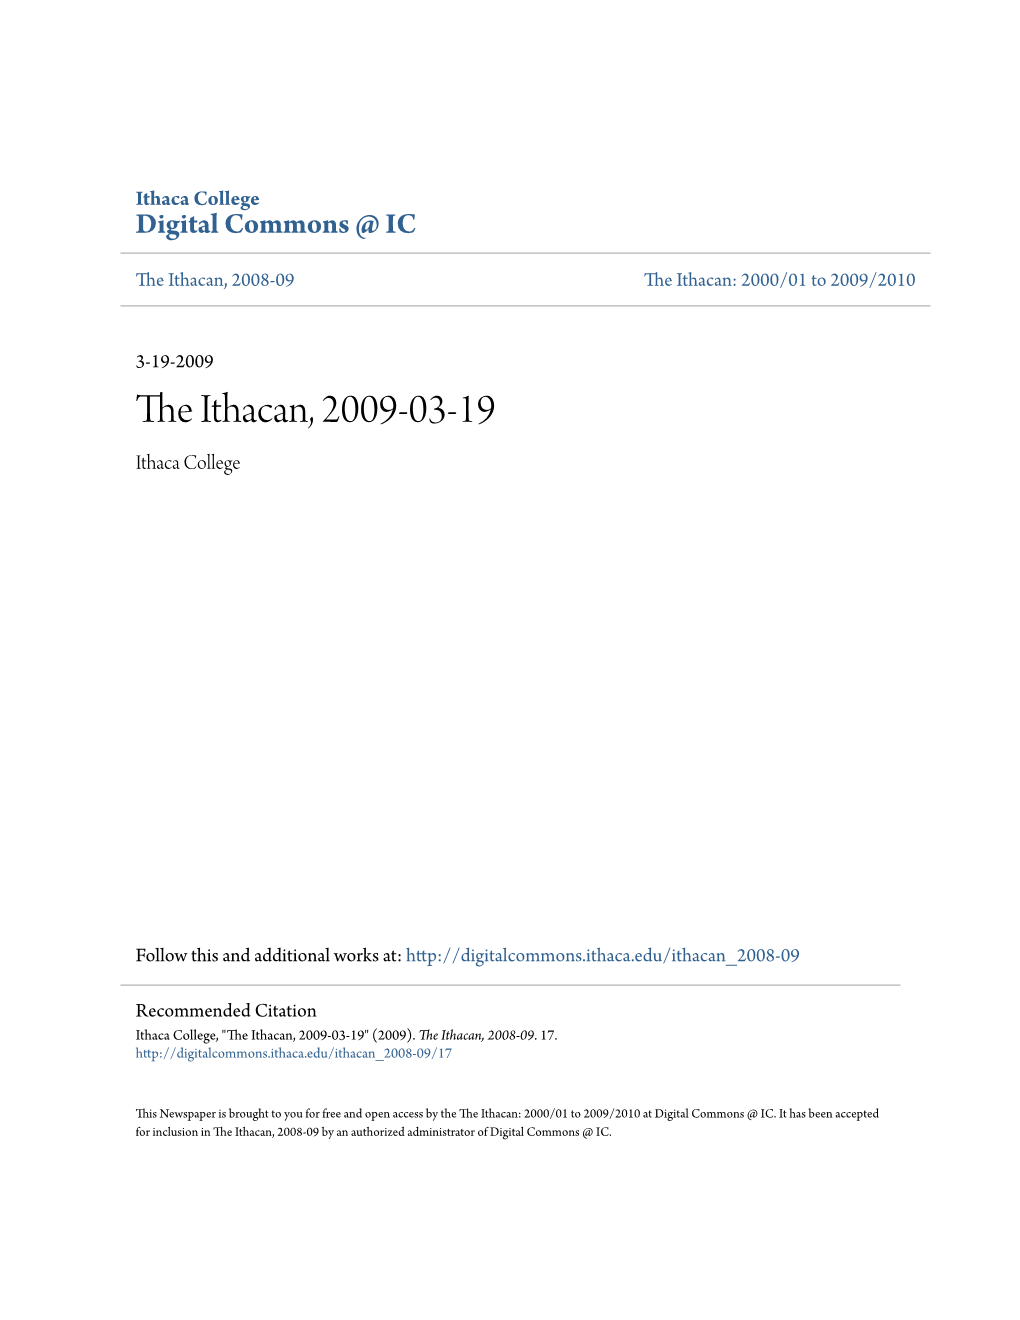 The Ithacan, 2009-03-19